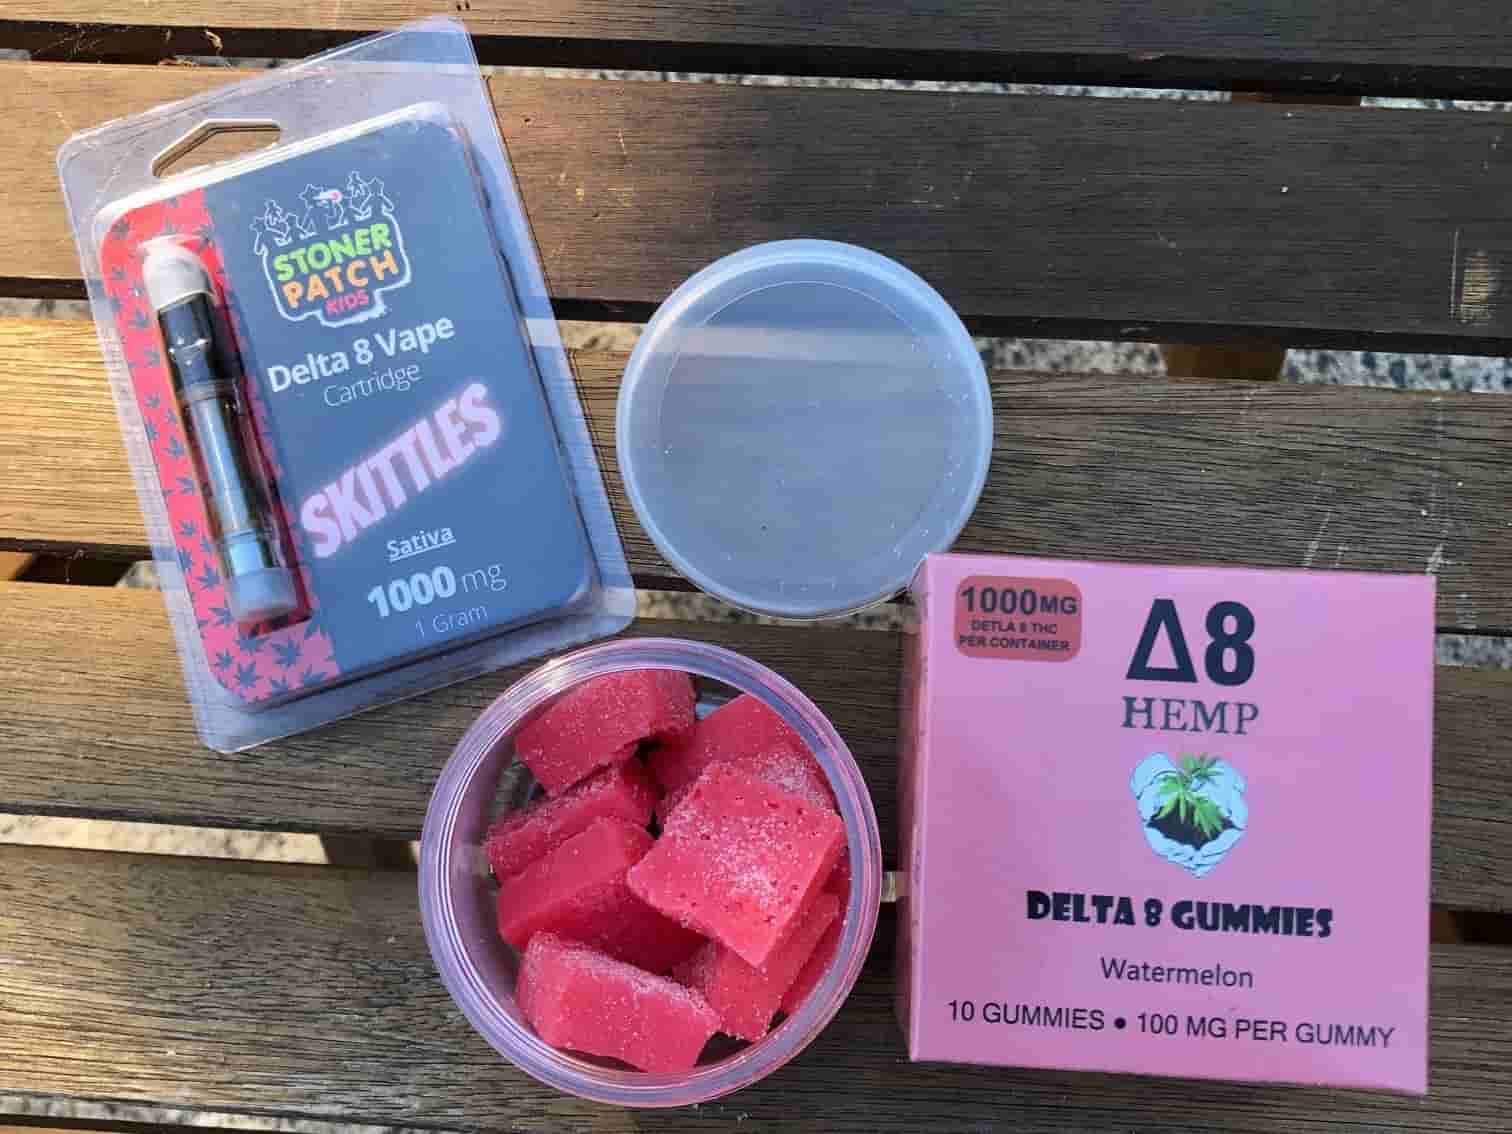 DELTA 8 VAPE.JUICE - Gummies|Thc|Products|Hemp|Product|Brand|Effects|Delta|Gummy|Cbd|Origin|Quality|Dosage|Delta-8|Dose|Usasource|Flavors|Brands|Ingredients|Range|Customers|Edibles|Cartridges|Reviews|Side|List|Health|Cannabis|Lab|Customer|Options|Benefits|Overviewproducts|Research|Time|Market|Drug|Farms|Party|People|Delta-8 Thc|Delta-8 Products|Delta-9 Thc|Delta-8 Gummies|Delta-8 Thc Products|Delta-8 Brands|Customer Reviews|Brand Overviewproducts|Drug Tests|Free Shipping|Similar Benefits|Vape Cartridges|Hemp Doctor|United States|Third Party Lab|Drug Test|Thc Edibles|Health Canada|Cannabis Plant|Side Effects|Organic Hemp|Diamond Cbd|Reaction Time|Legal Hemp|Psychoactive Effects|Psychoactive Properties|Third Party|Dry Eyes|Delta-8 Market|Tolerance Level